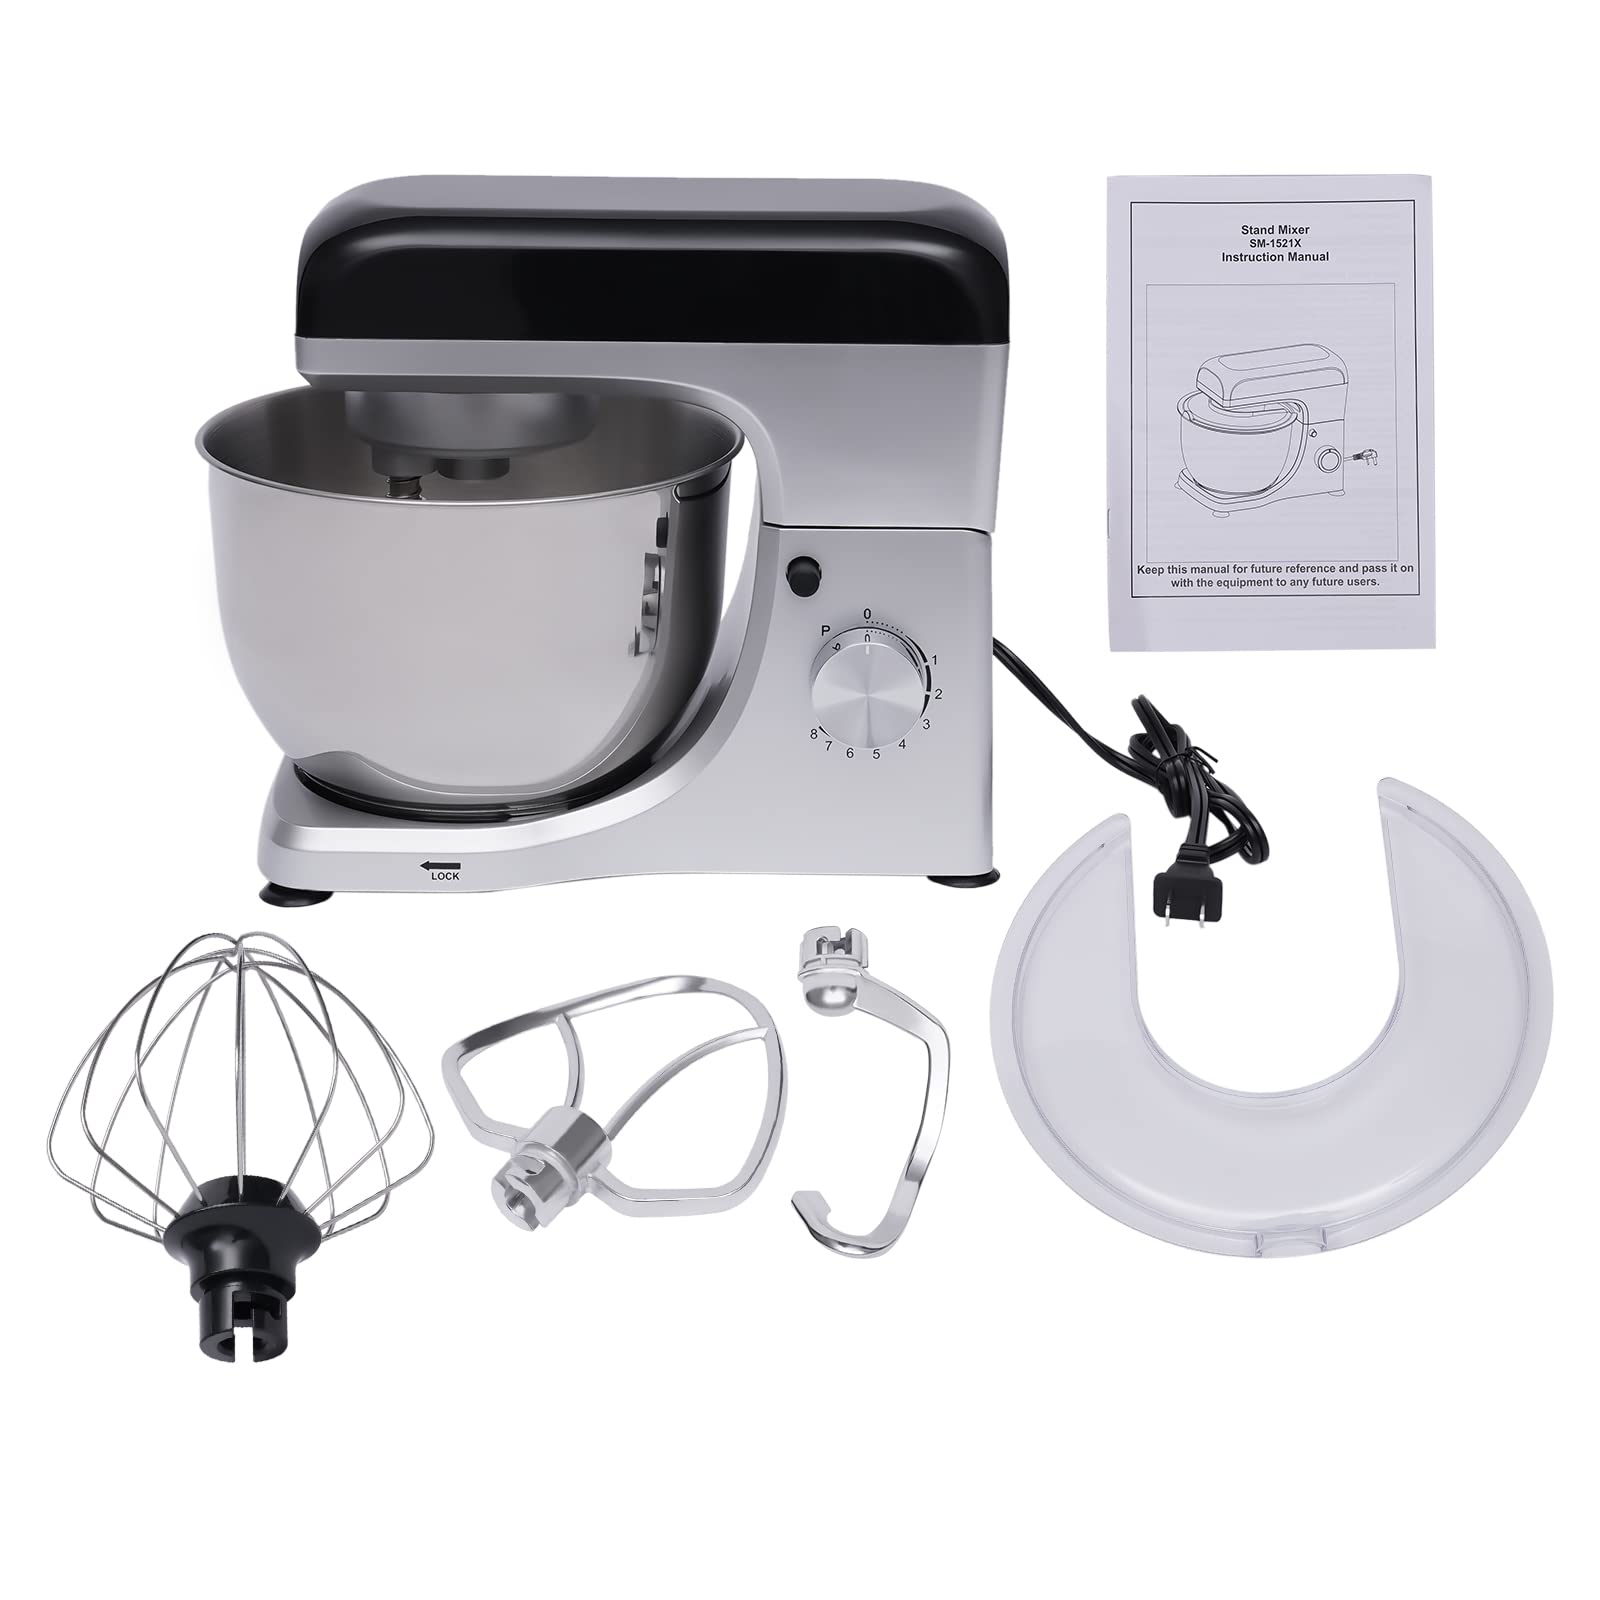 4.8Qt Standing Mixer, 500W Electric Food Stand Mixer with Splash Proof Cover, Adjustable Speeds Dough Mixer for Kneading Dough, Stirring Jams, Whipping Cream